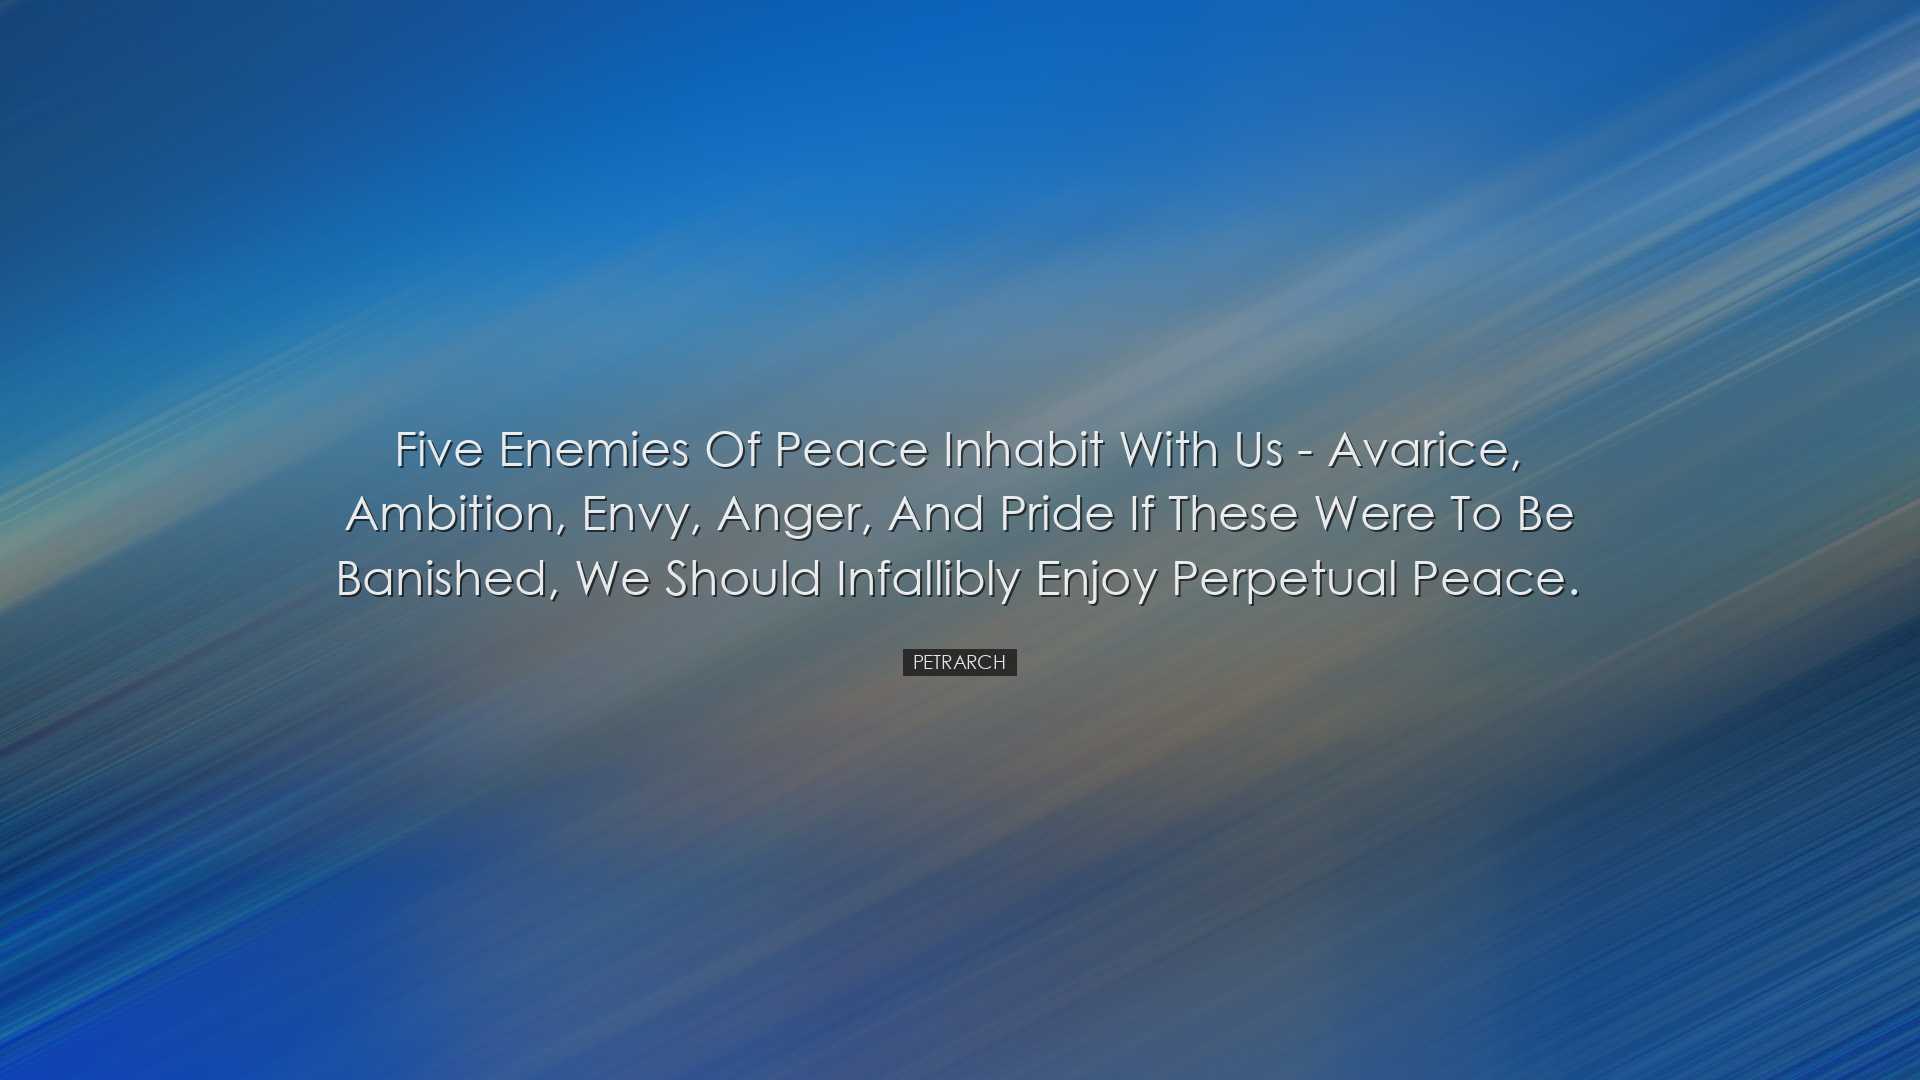 Five enemies of peace inhabit with us - avarice, ambition, envy, a